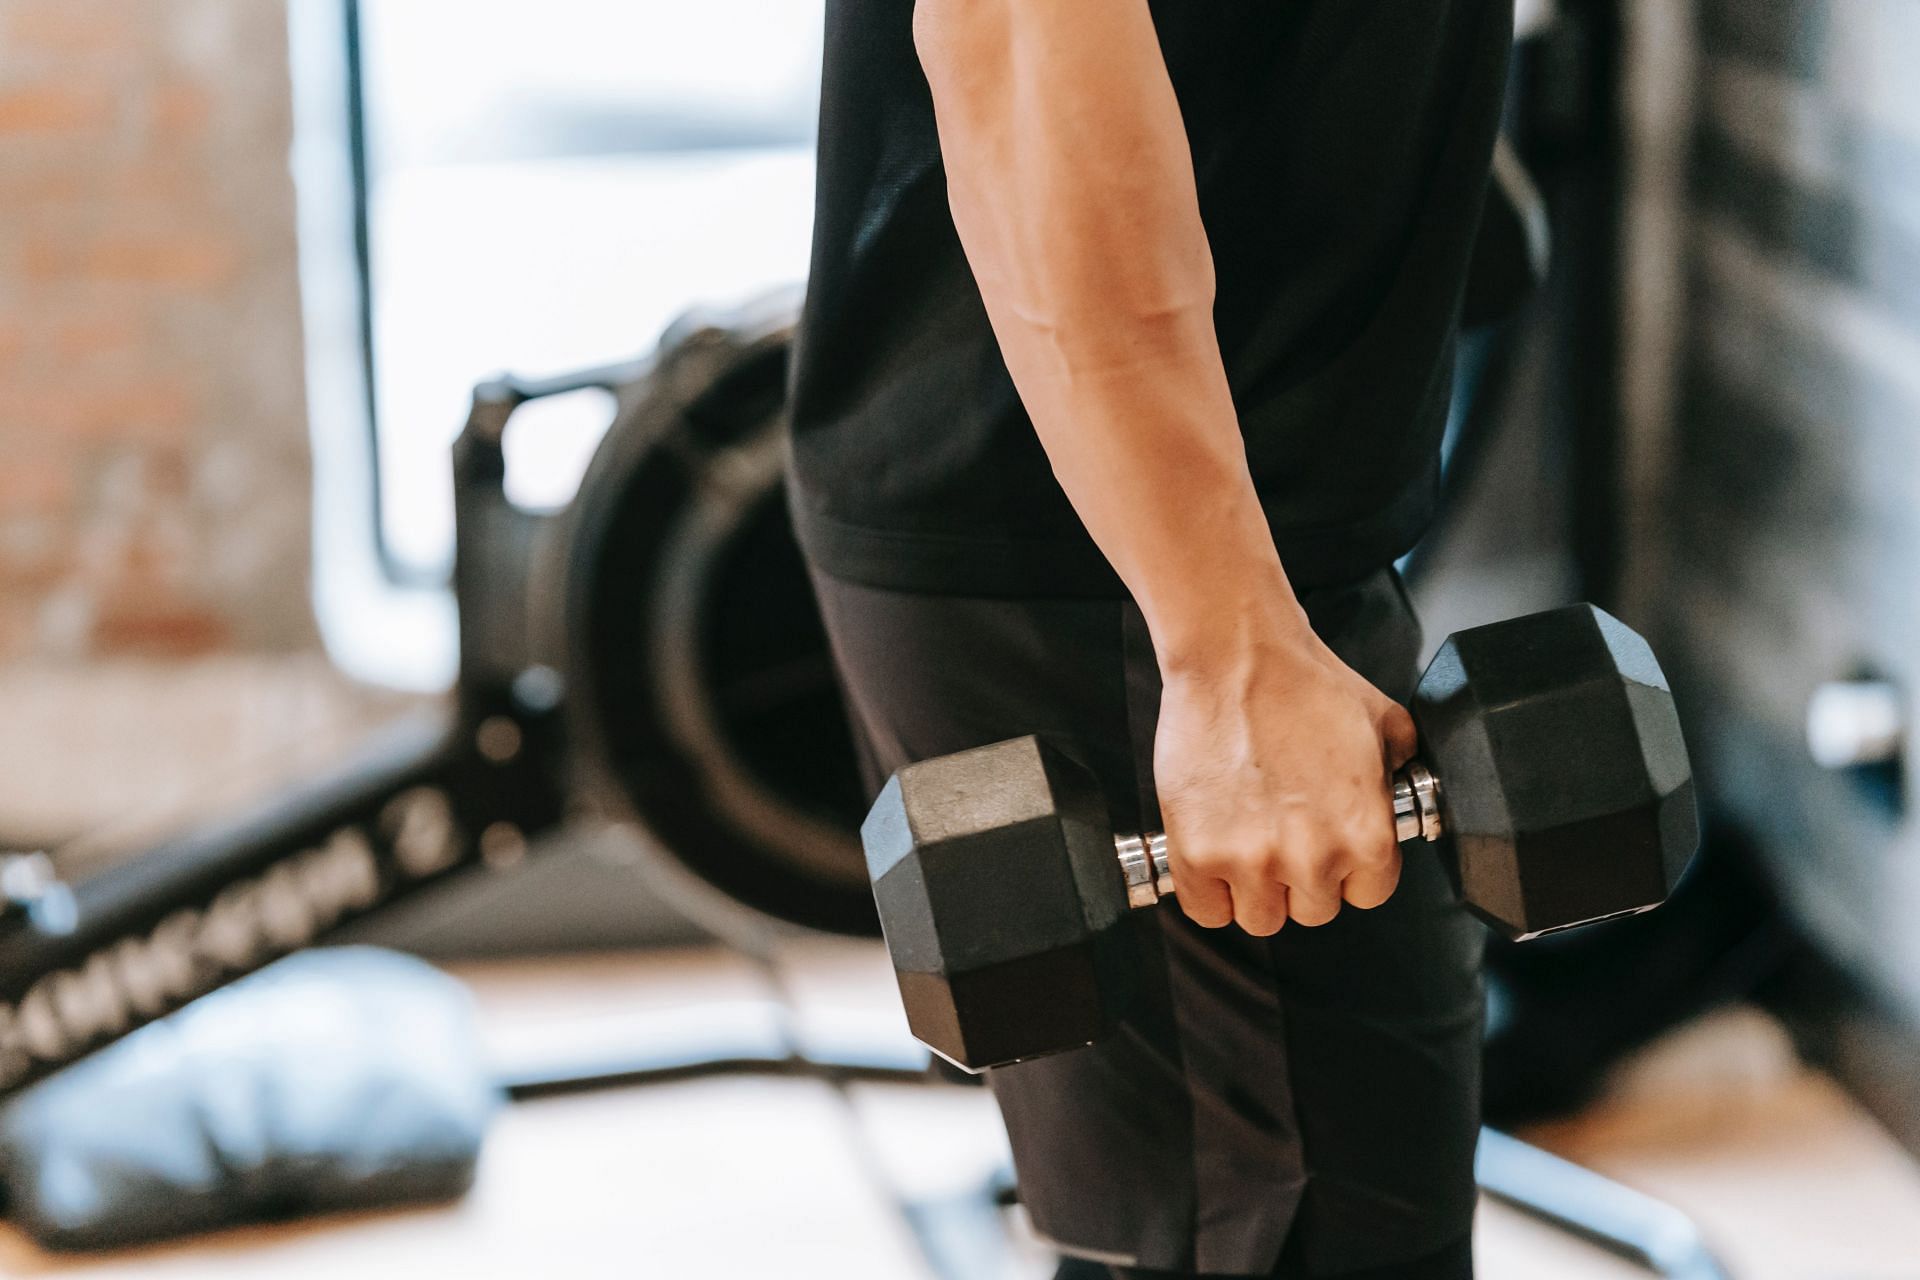 Don&#039;t try to lift too much weight too quickly while working out. (Image via Pexels/Andres Ayrton)